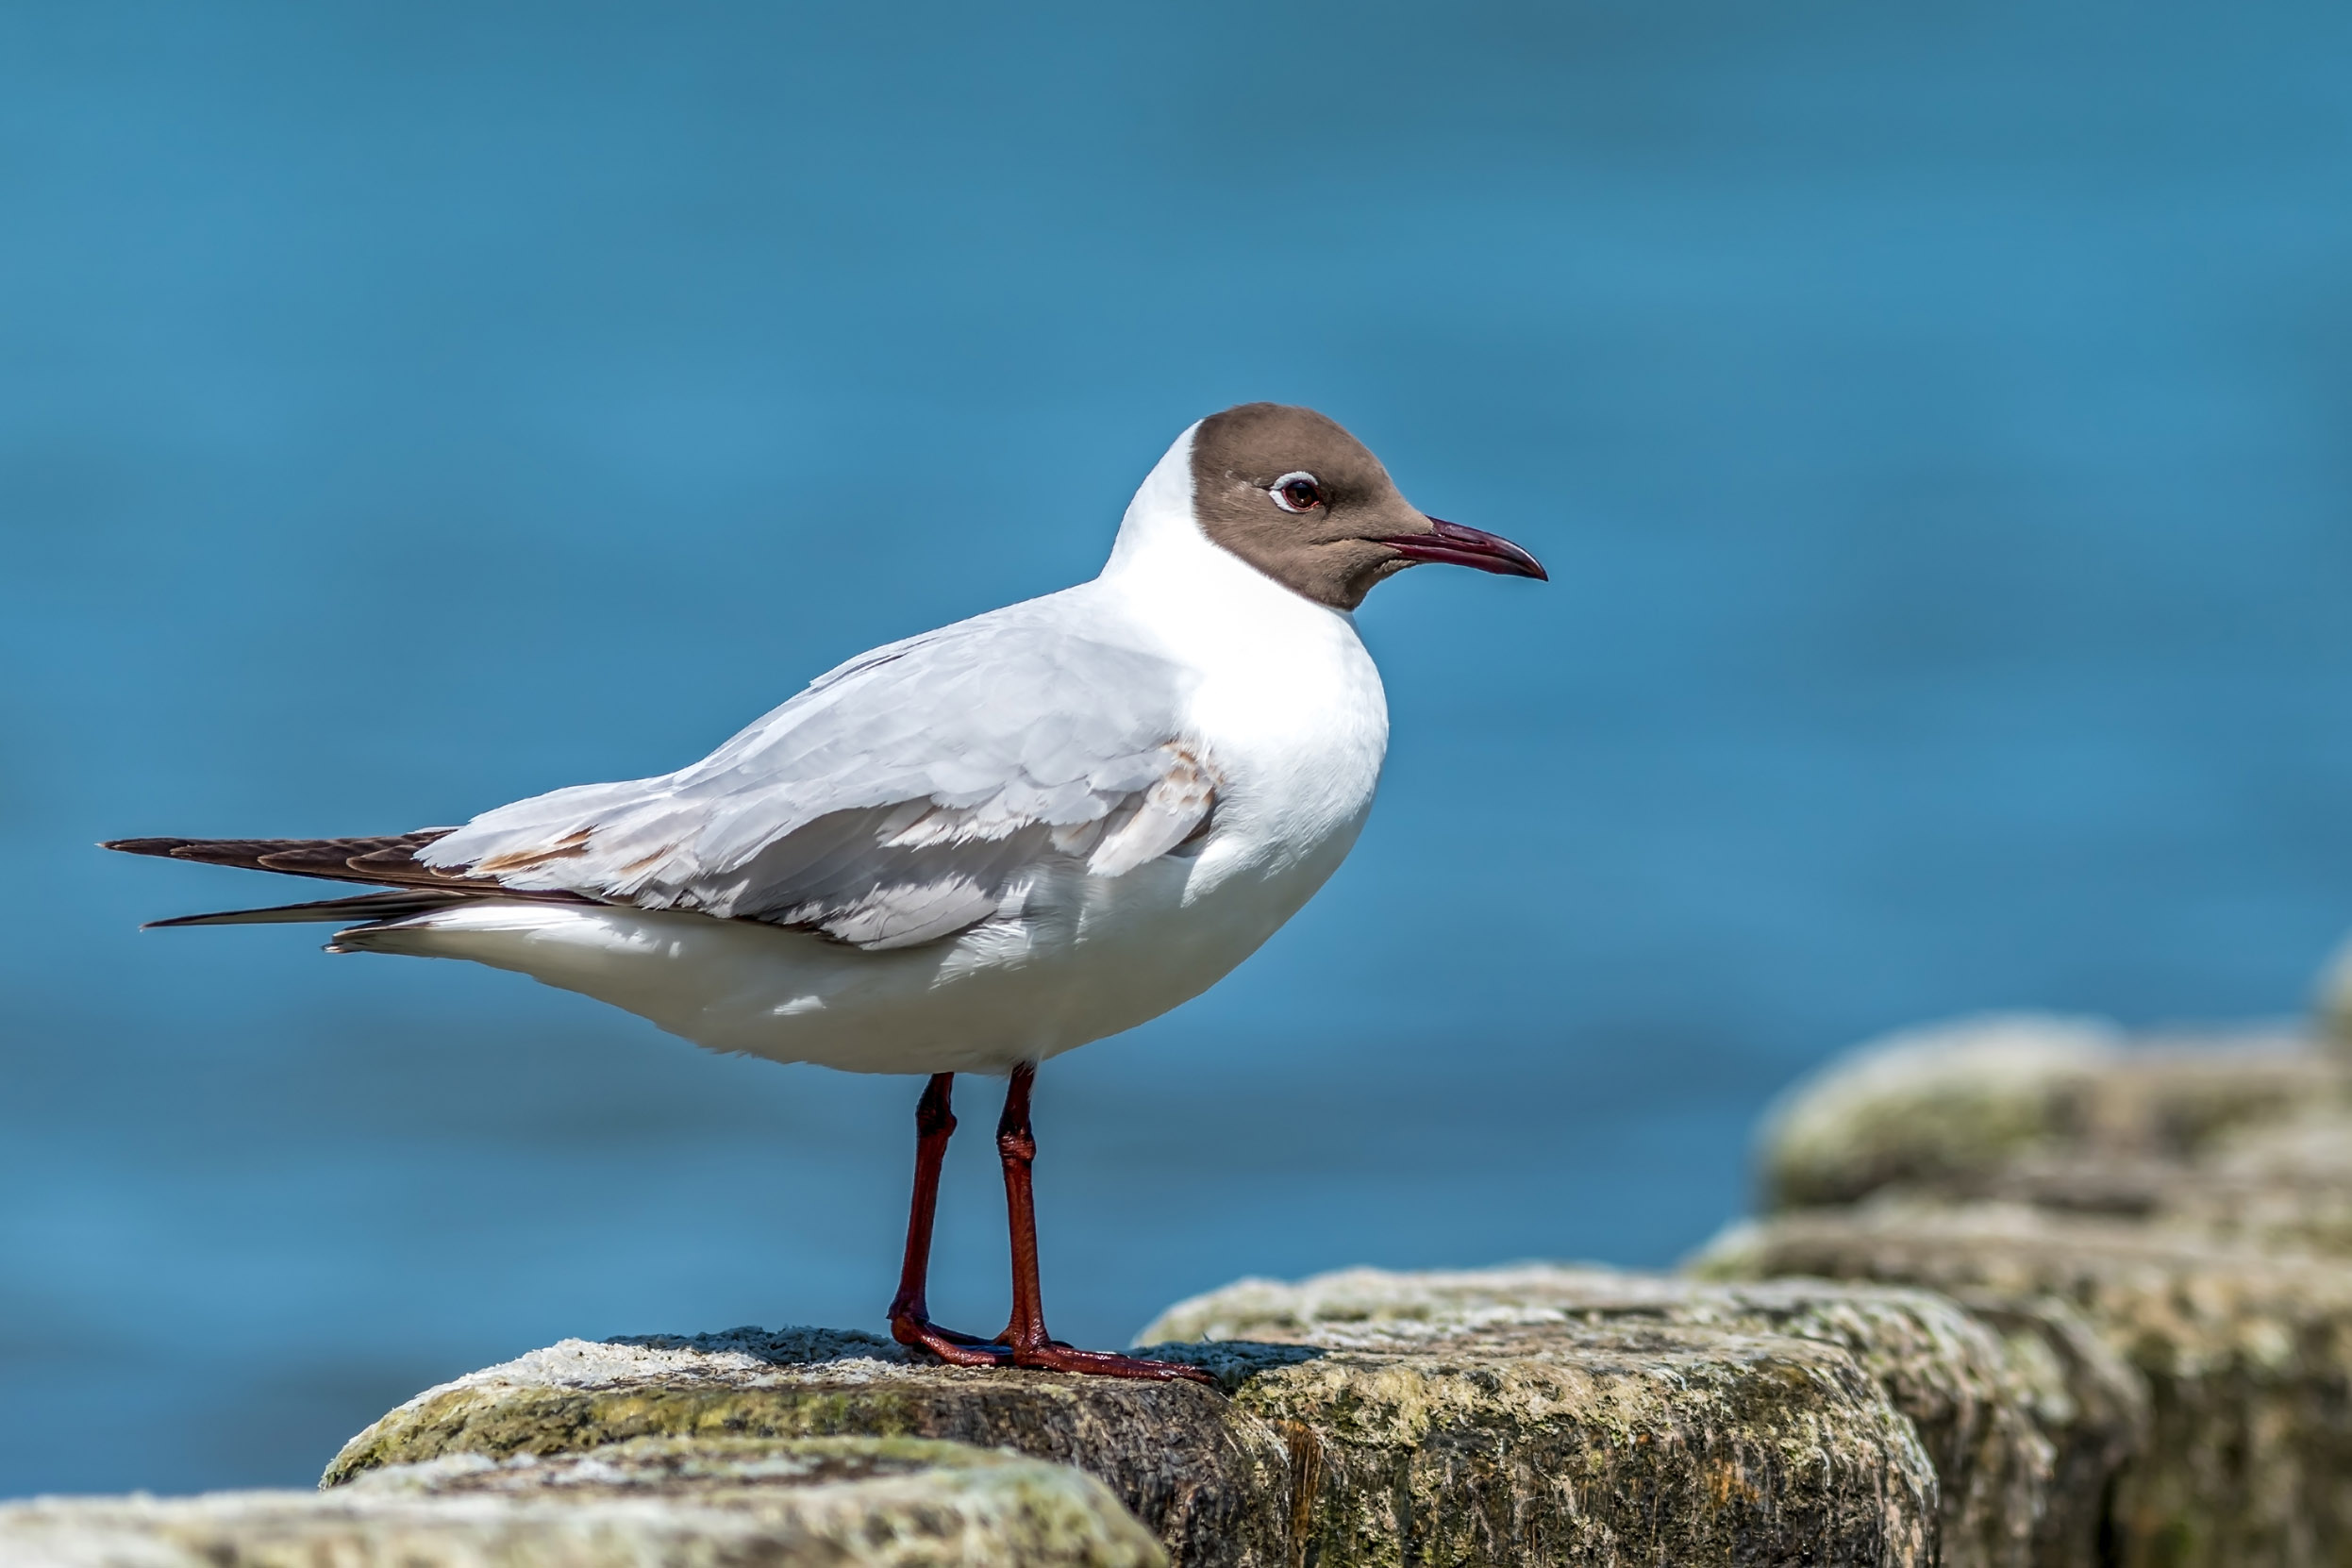 A lone Black-headed Gull perched on a stone wall next to the sea.